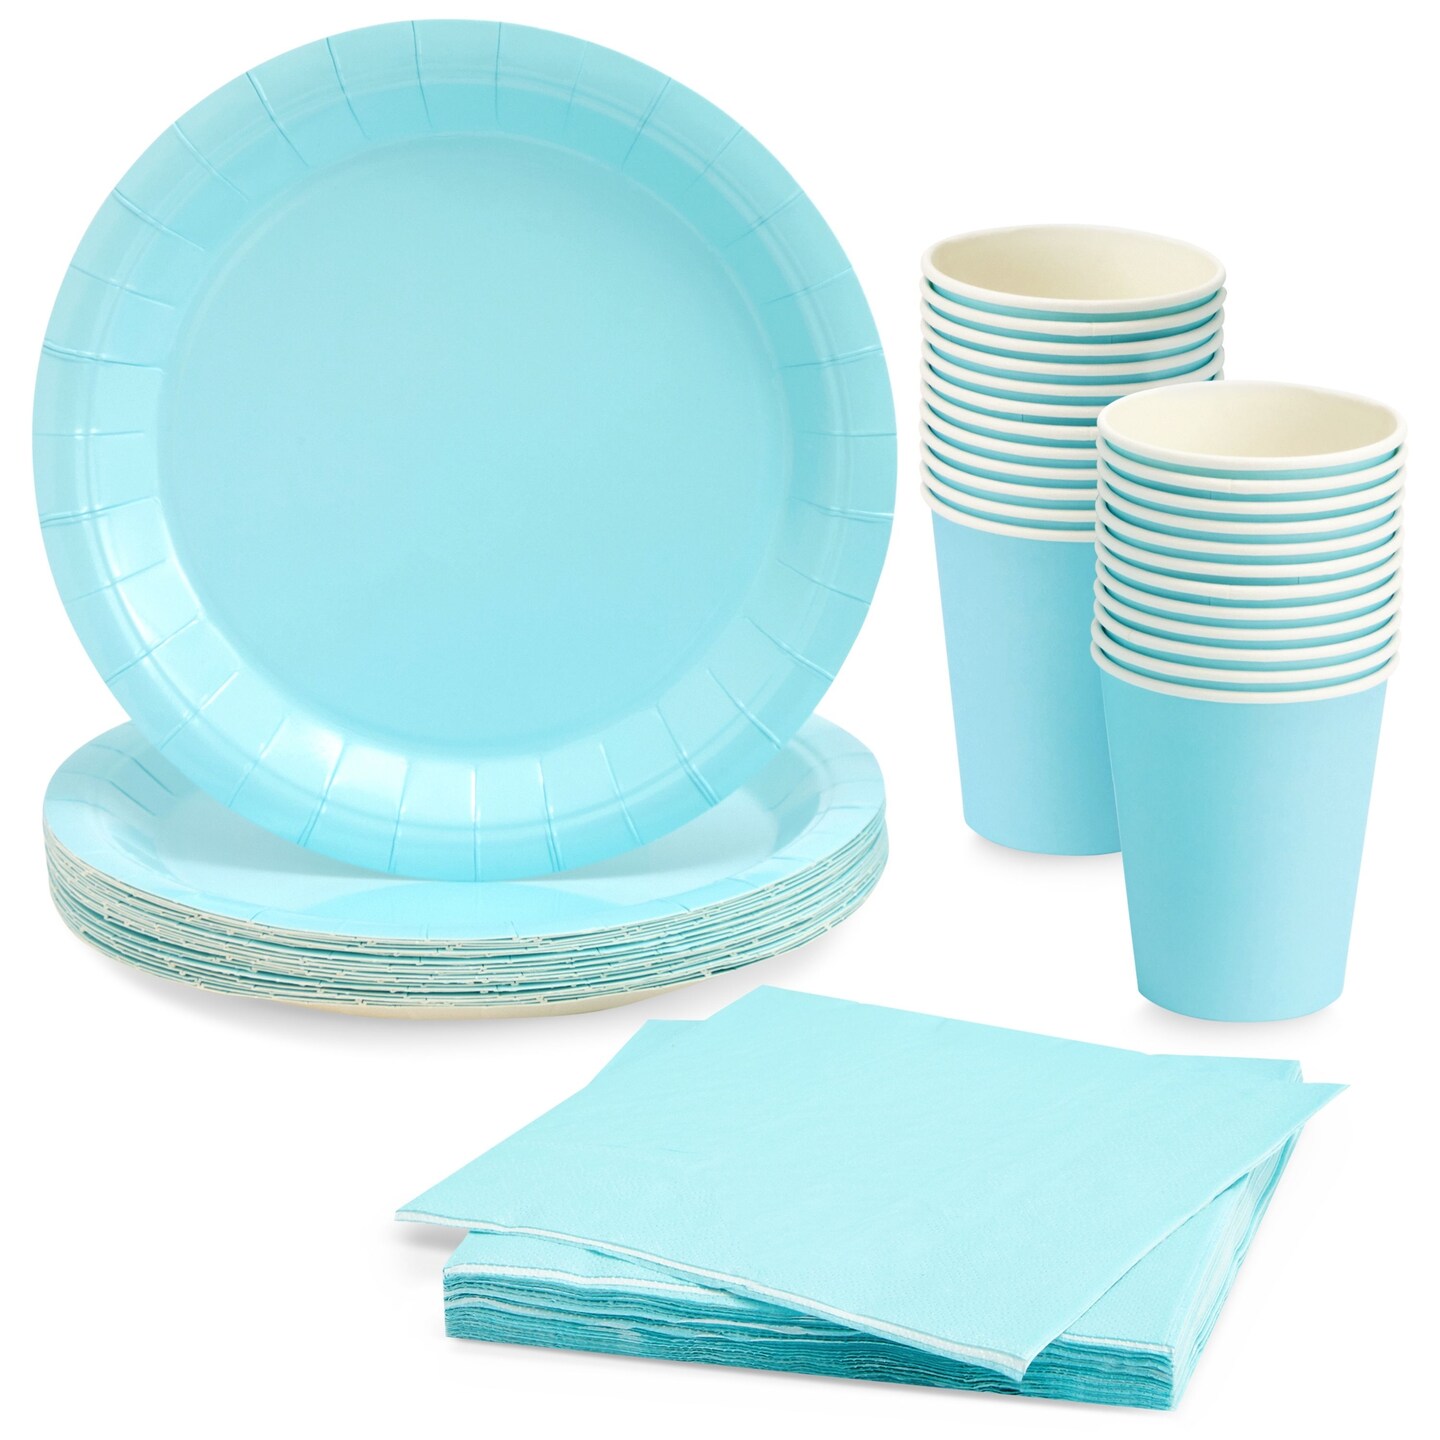 Serves 24 Light Blue Party Supplies, Disposable Paper Plates, Cups, Napkins for Birthday Party, Graduation, Gender Reveal, Baby Boy Shower (72 Pieces)